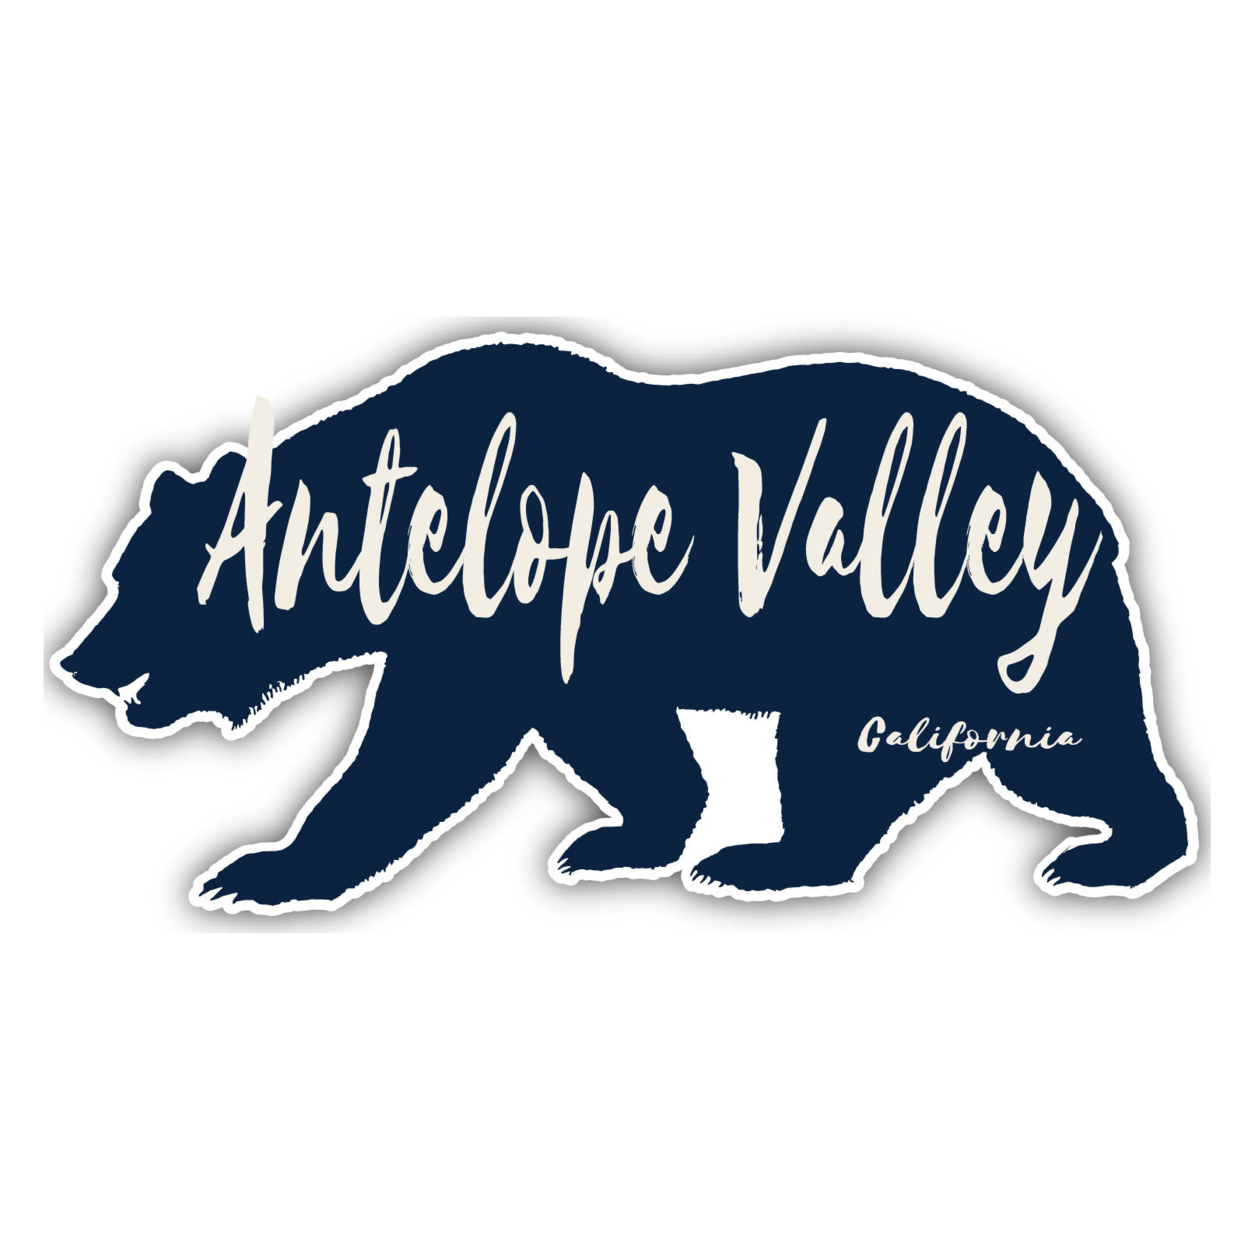 Antelope Valley California Souvenir Decorative Stickers (Choose Theme And Size) - 4-Pack, 10-Inch, Tent